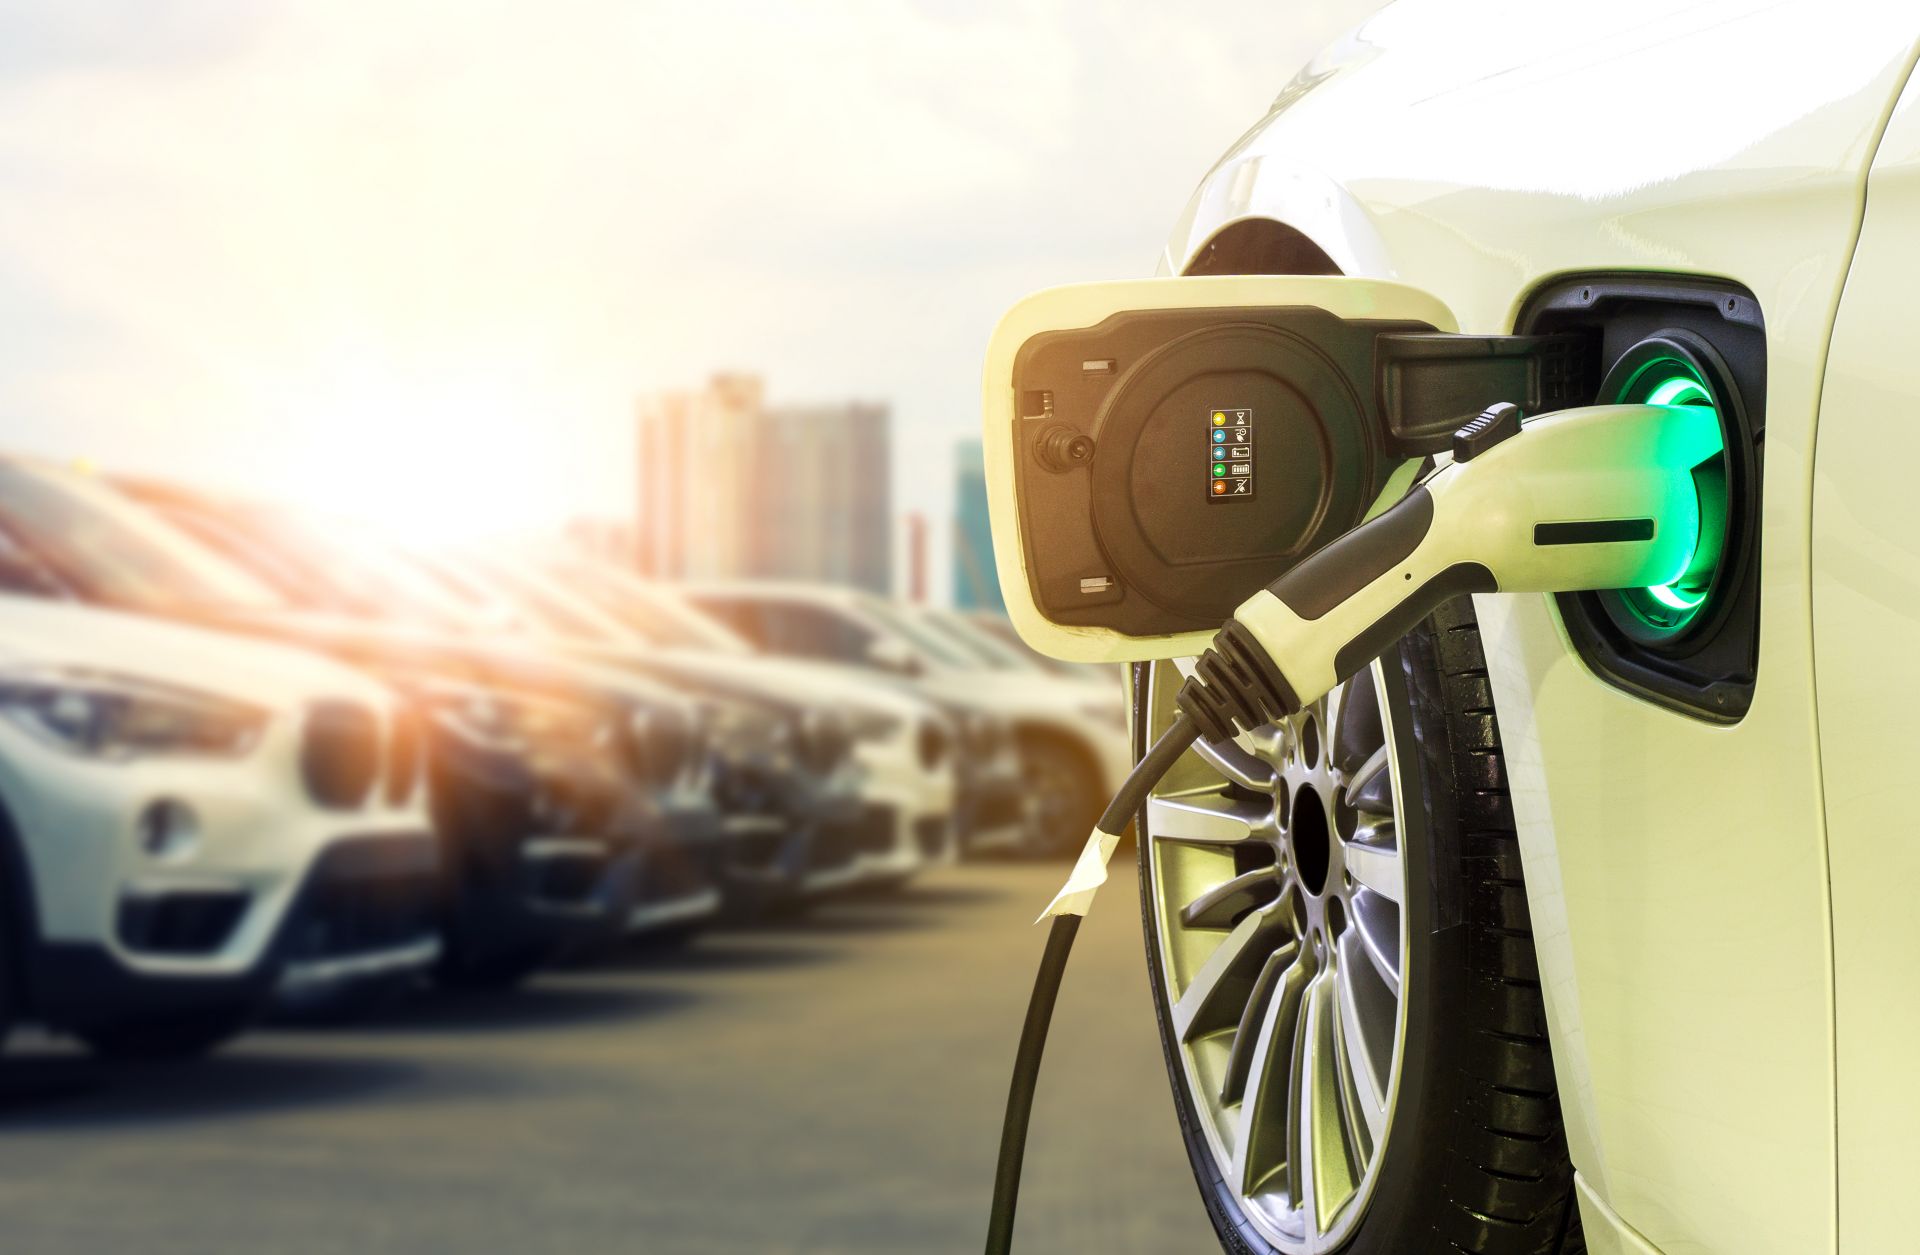 Electric vehicles make up only a small portion of total vehicle sales today, but demand for them is steadily growing.